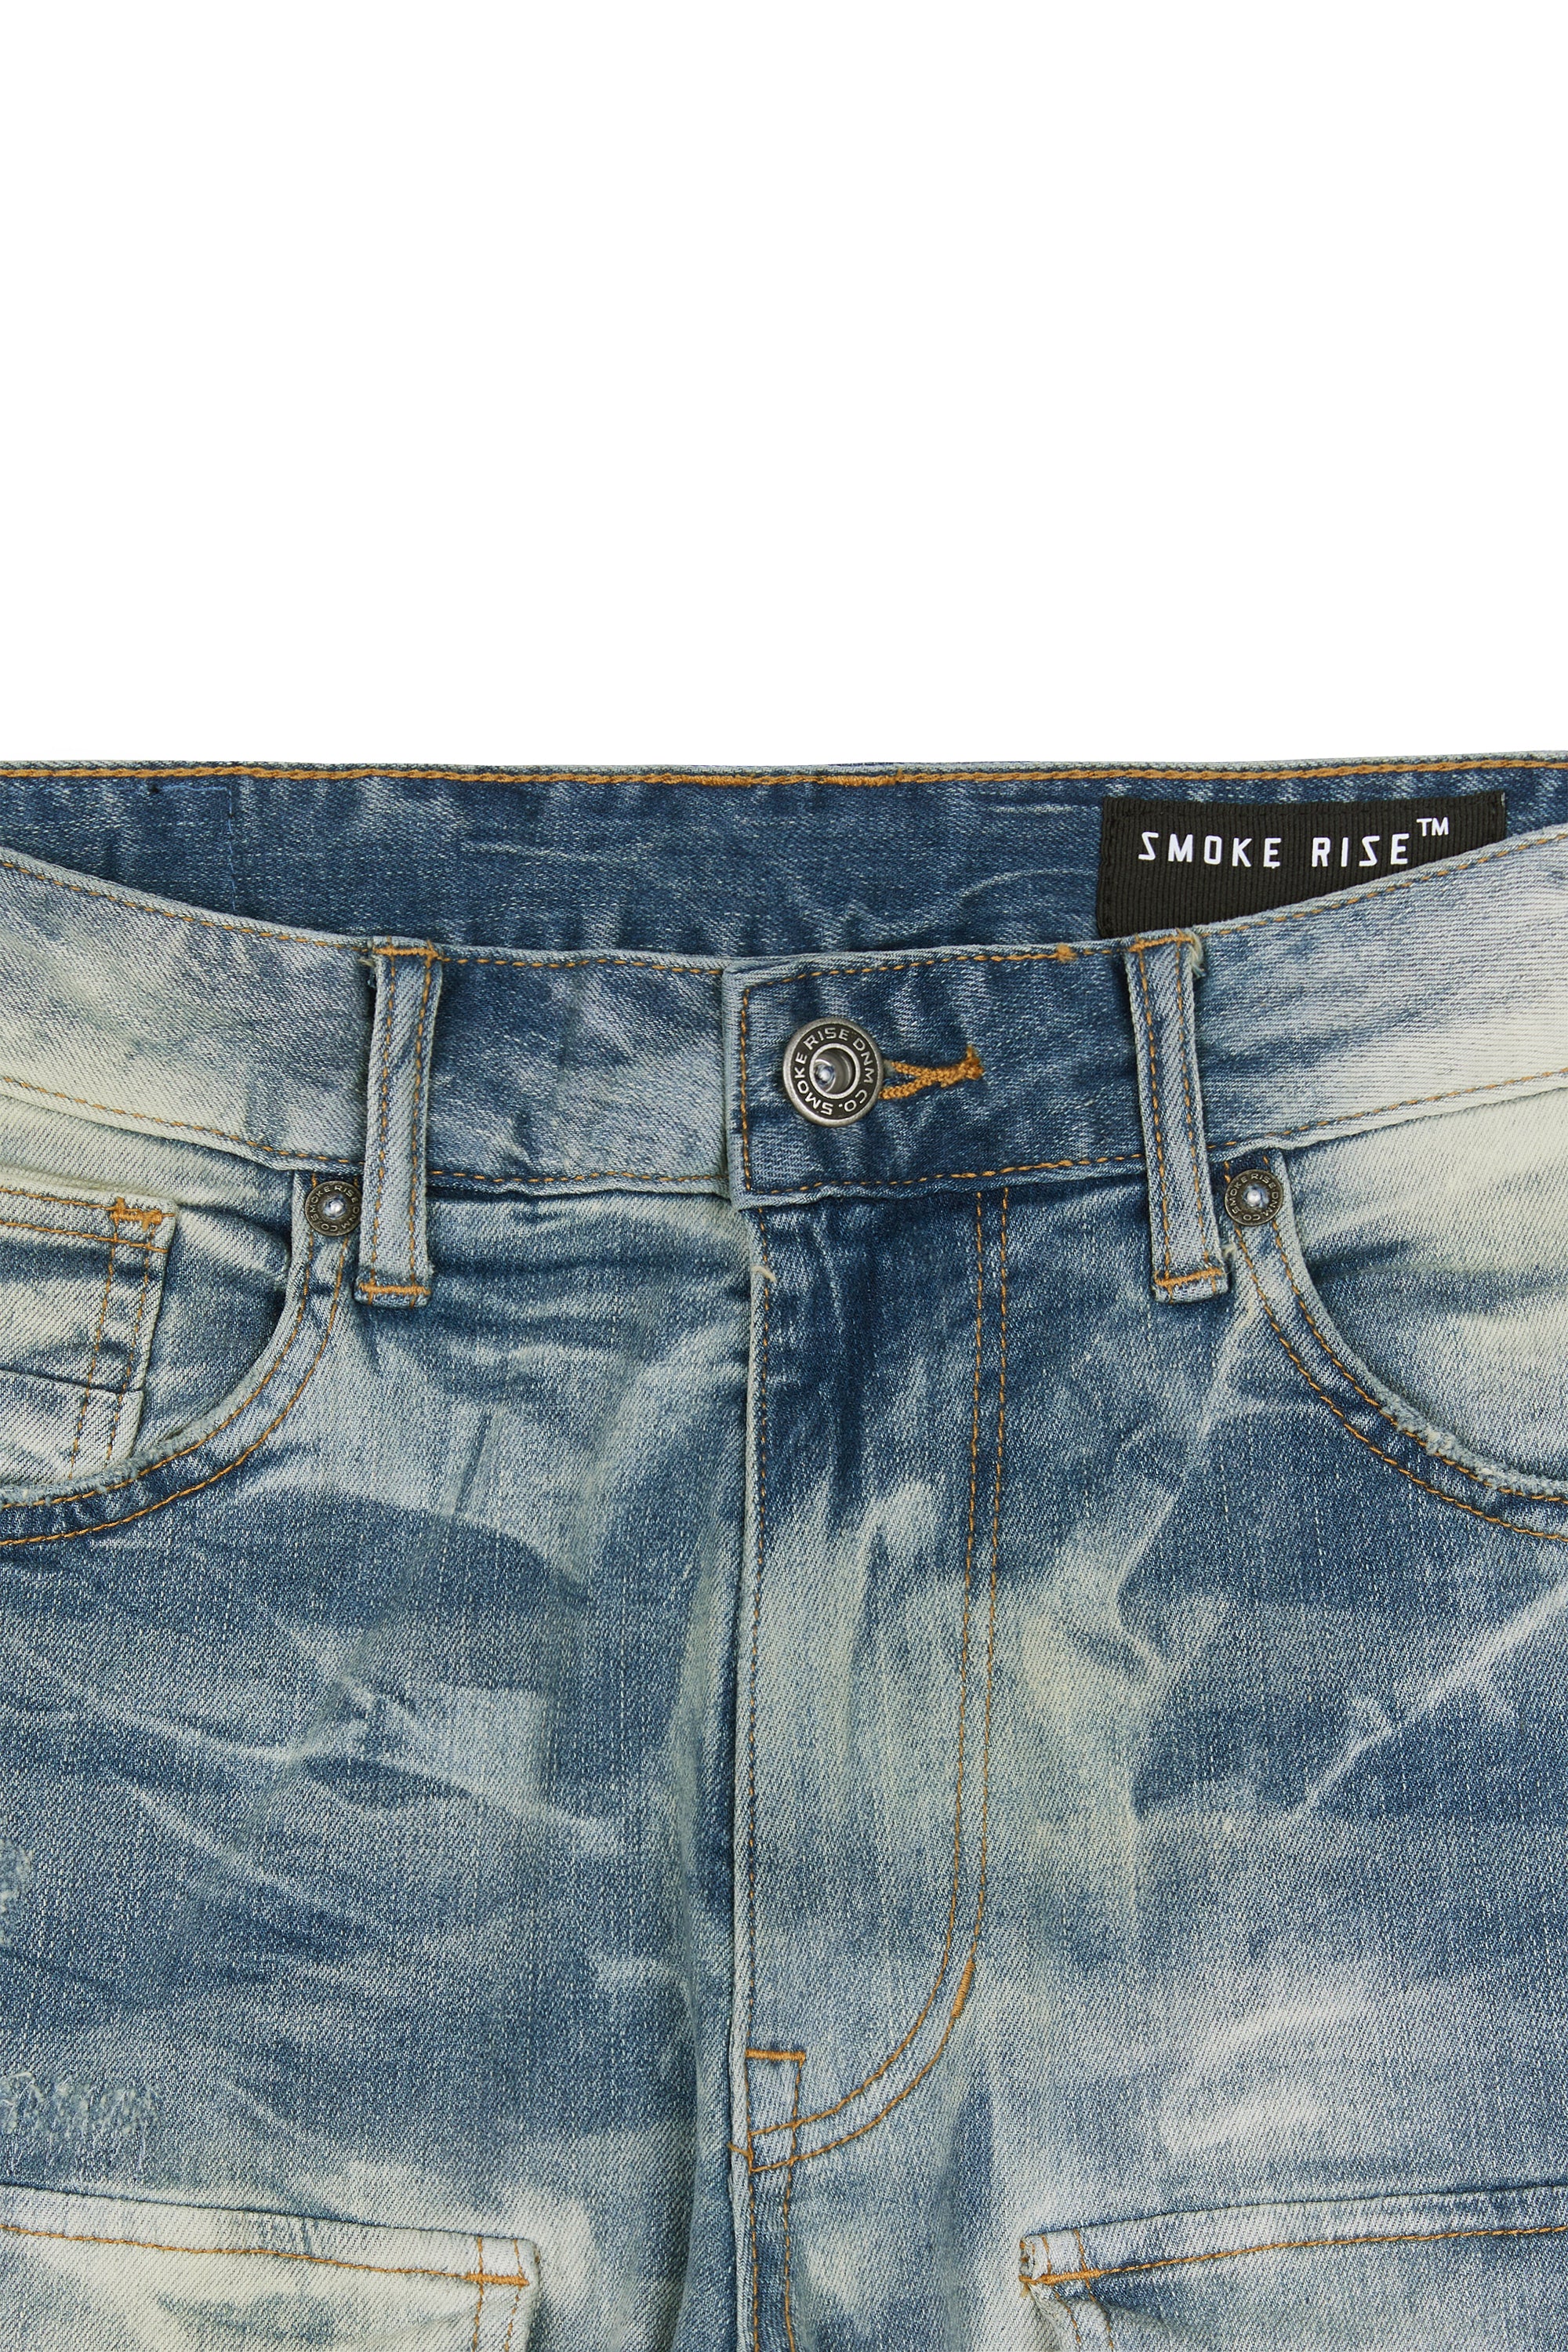 Stacked Utility Denim Jeans - Clyde Blue